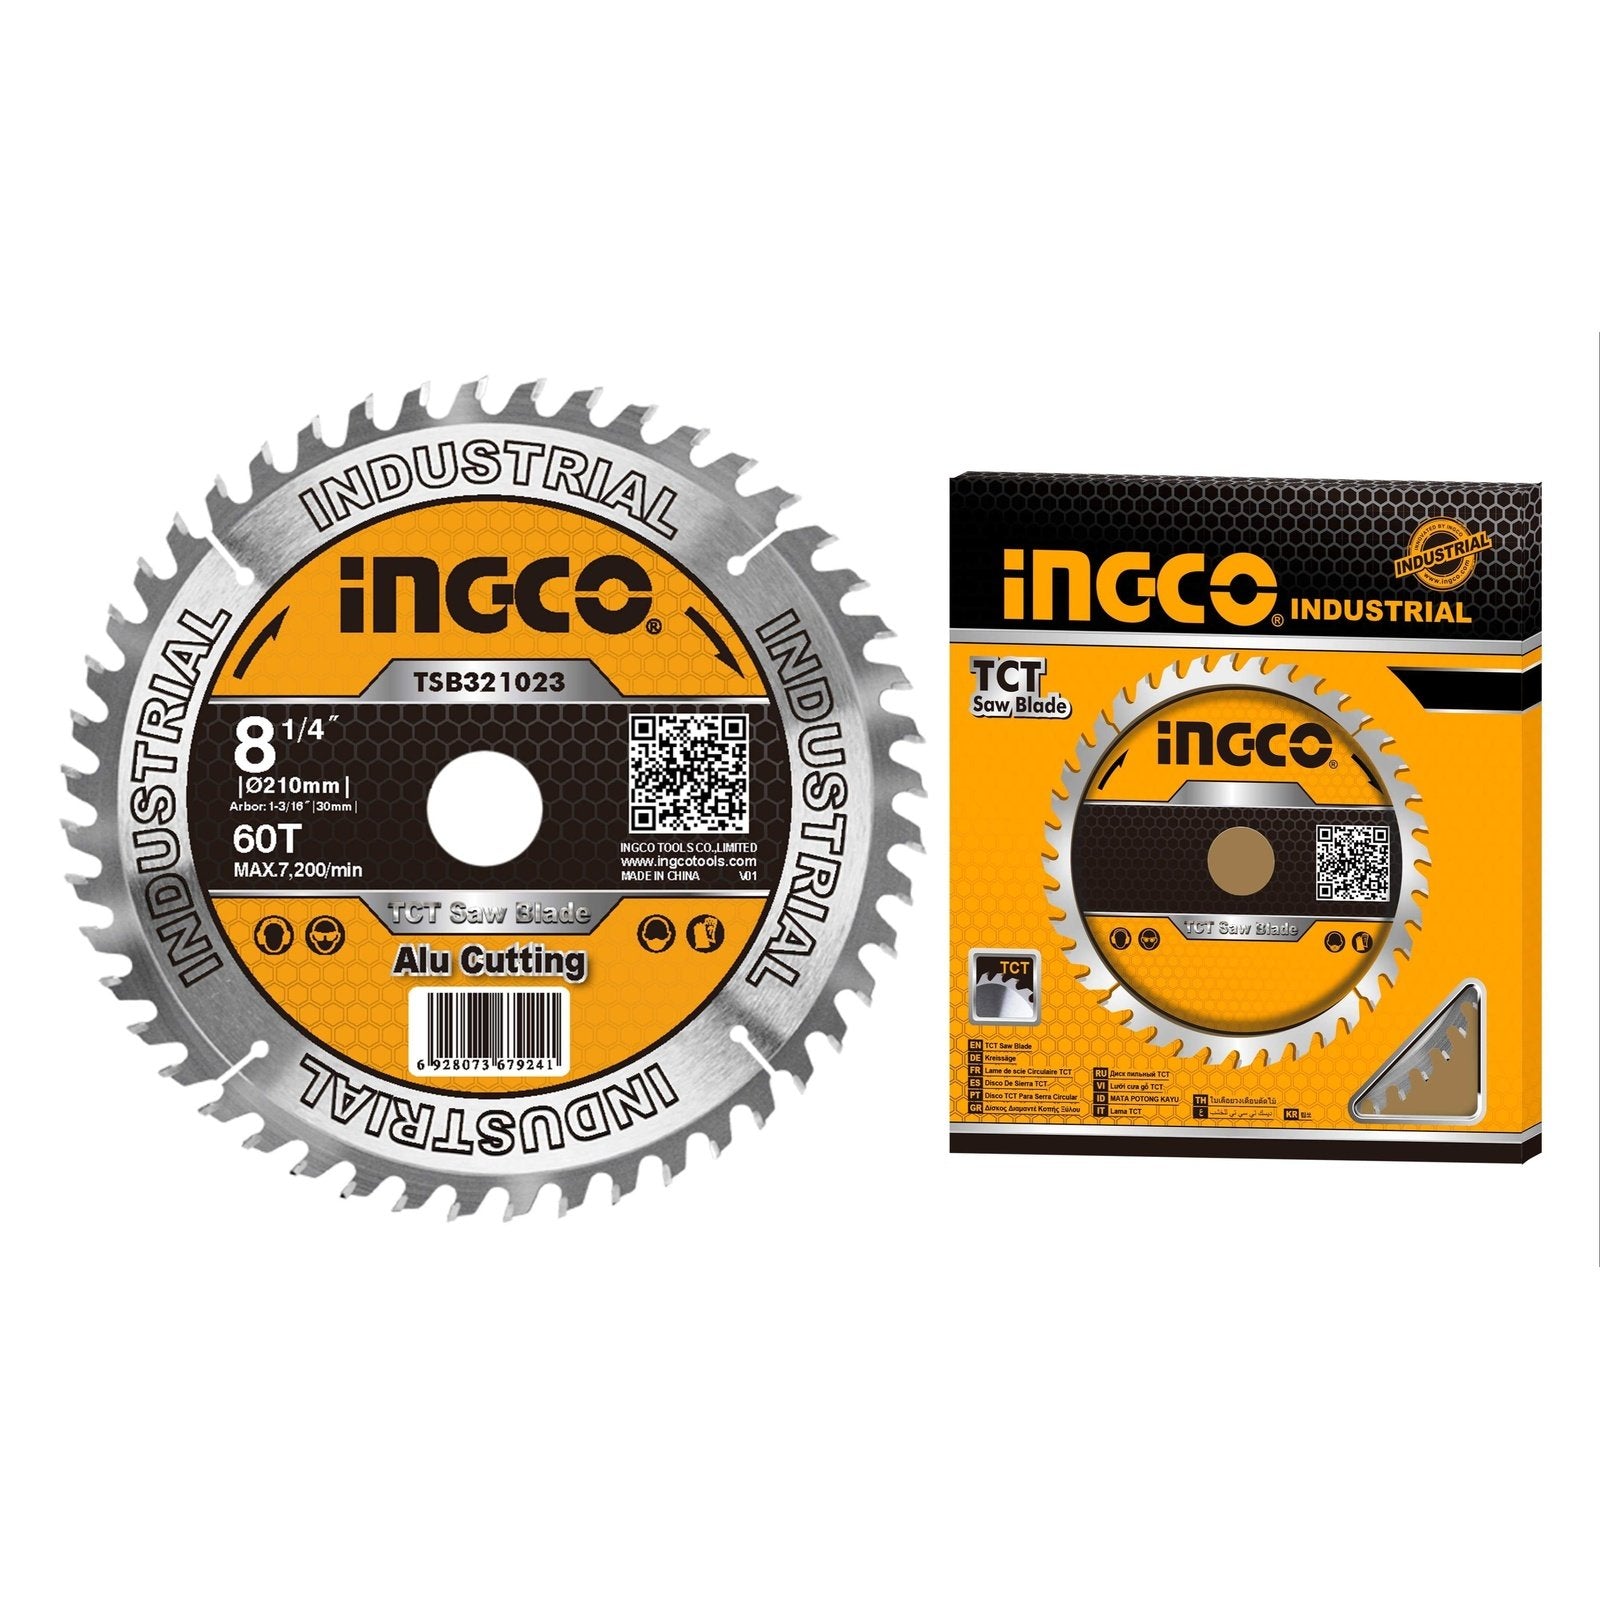 Ingco TCT Saw Blade for Aluminum | Supply Master | Accra, Ghana Tools Building Steel Engineering Hardware tool